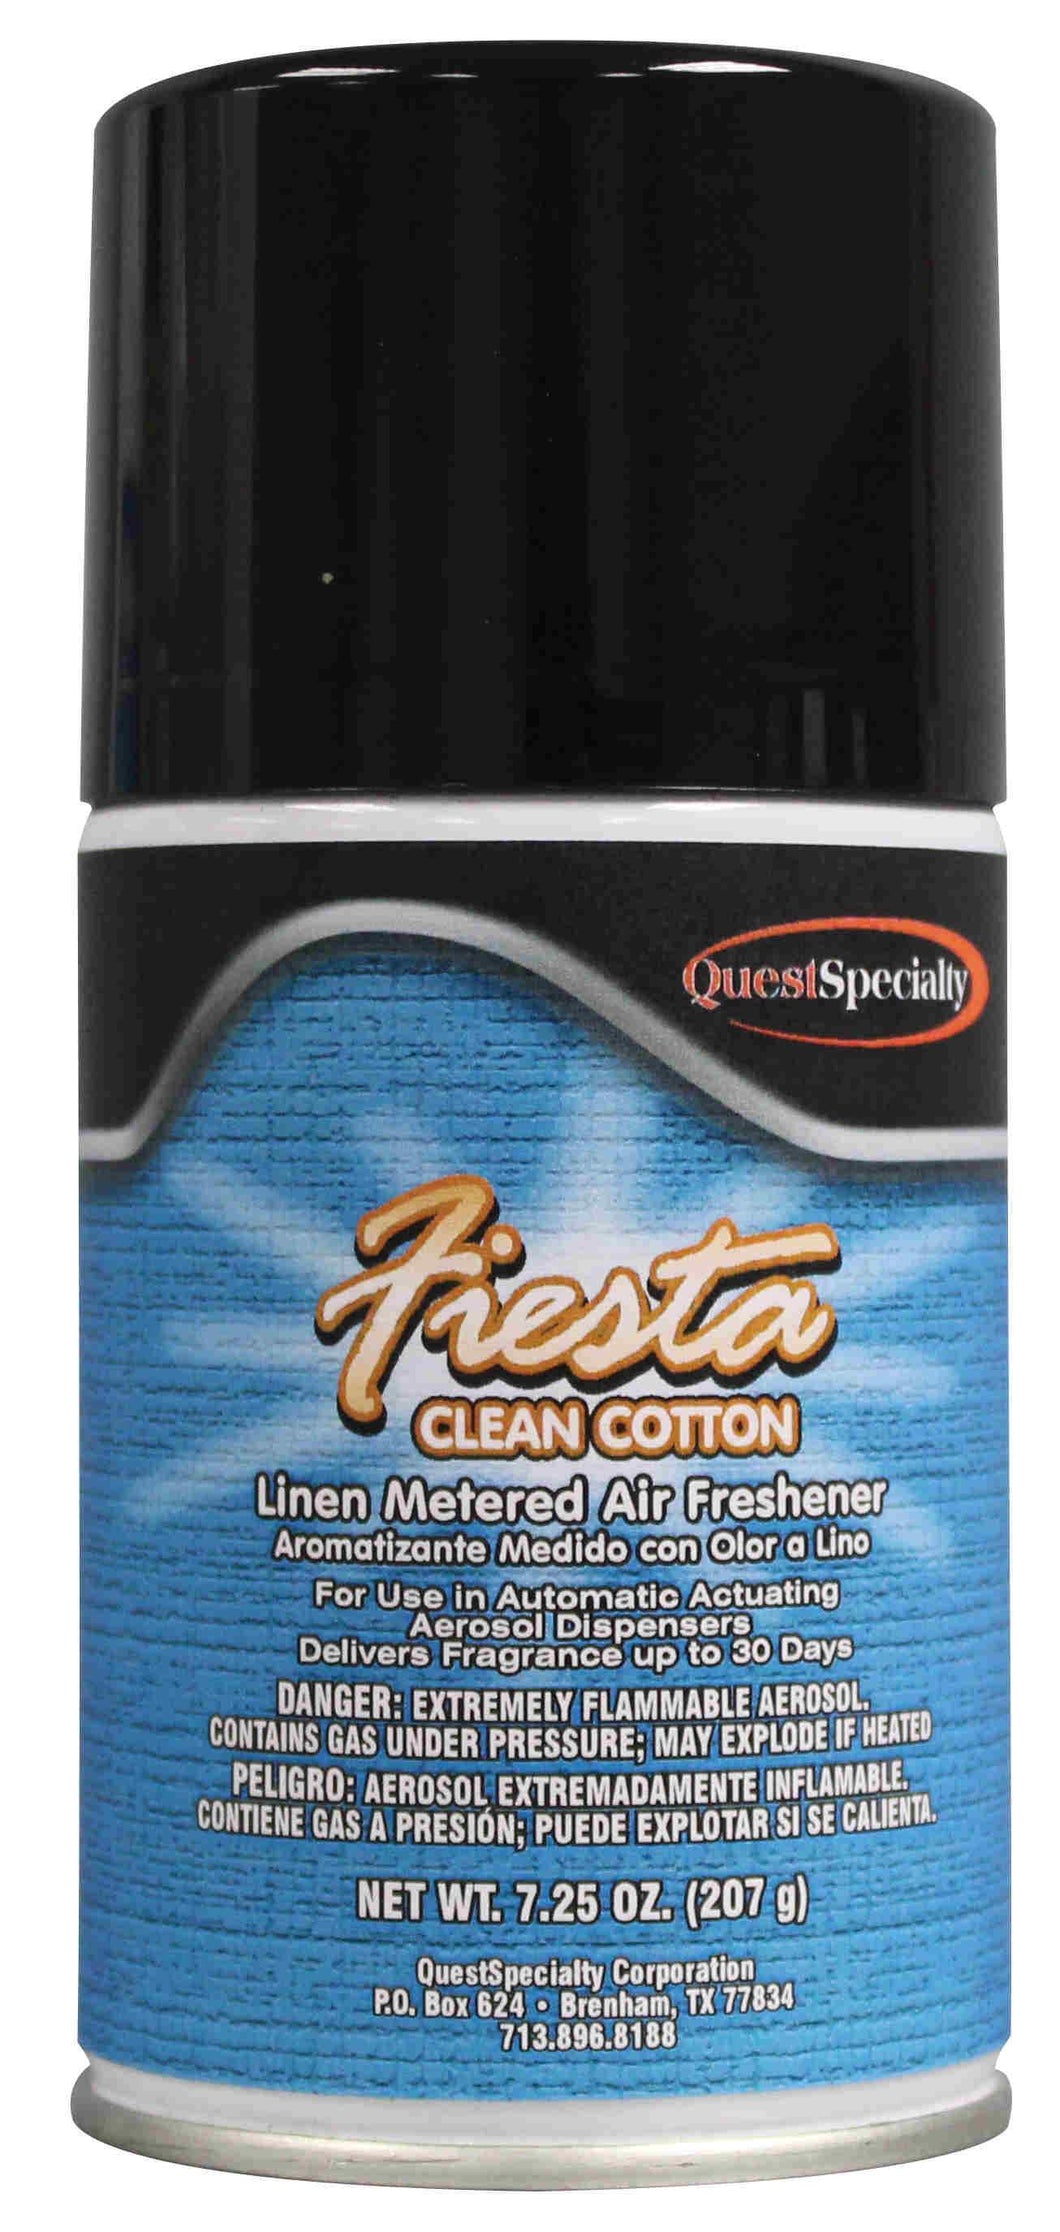 Automatic Air Freshener Spray Refill, Fiesta Clean Cotton, 7.25 oz Can, QuestSpecialty, Pack of 12